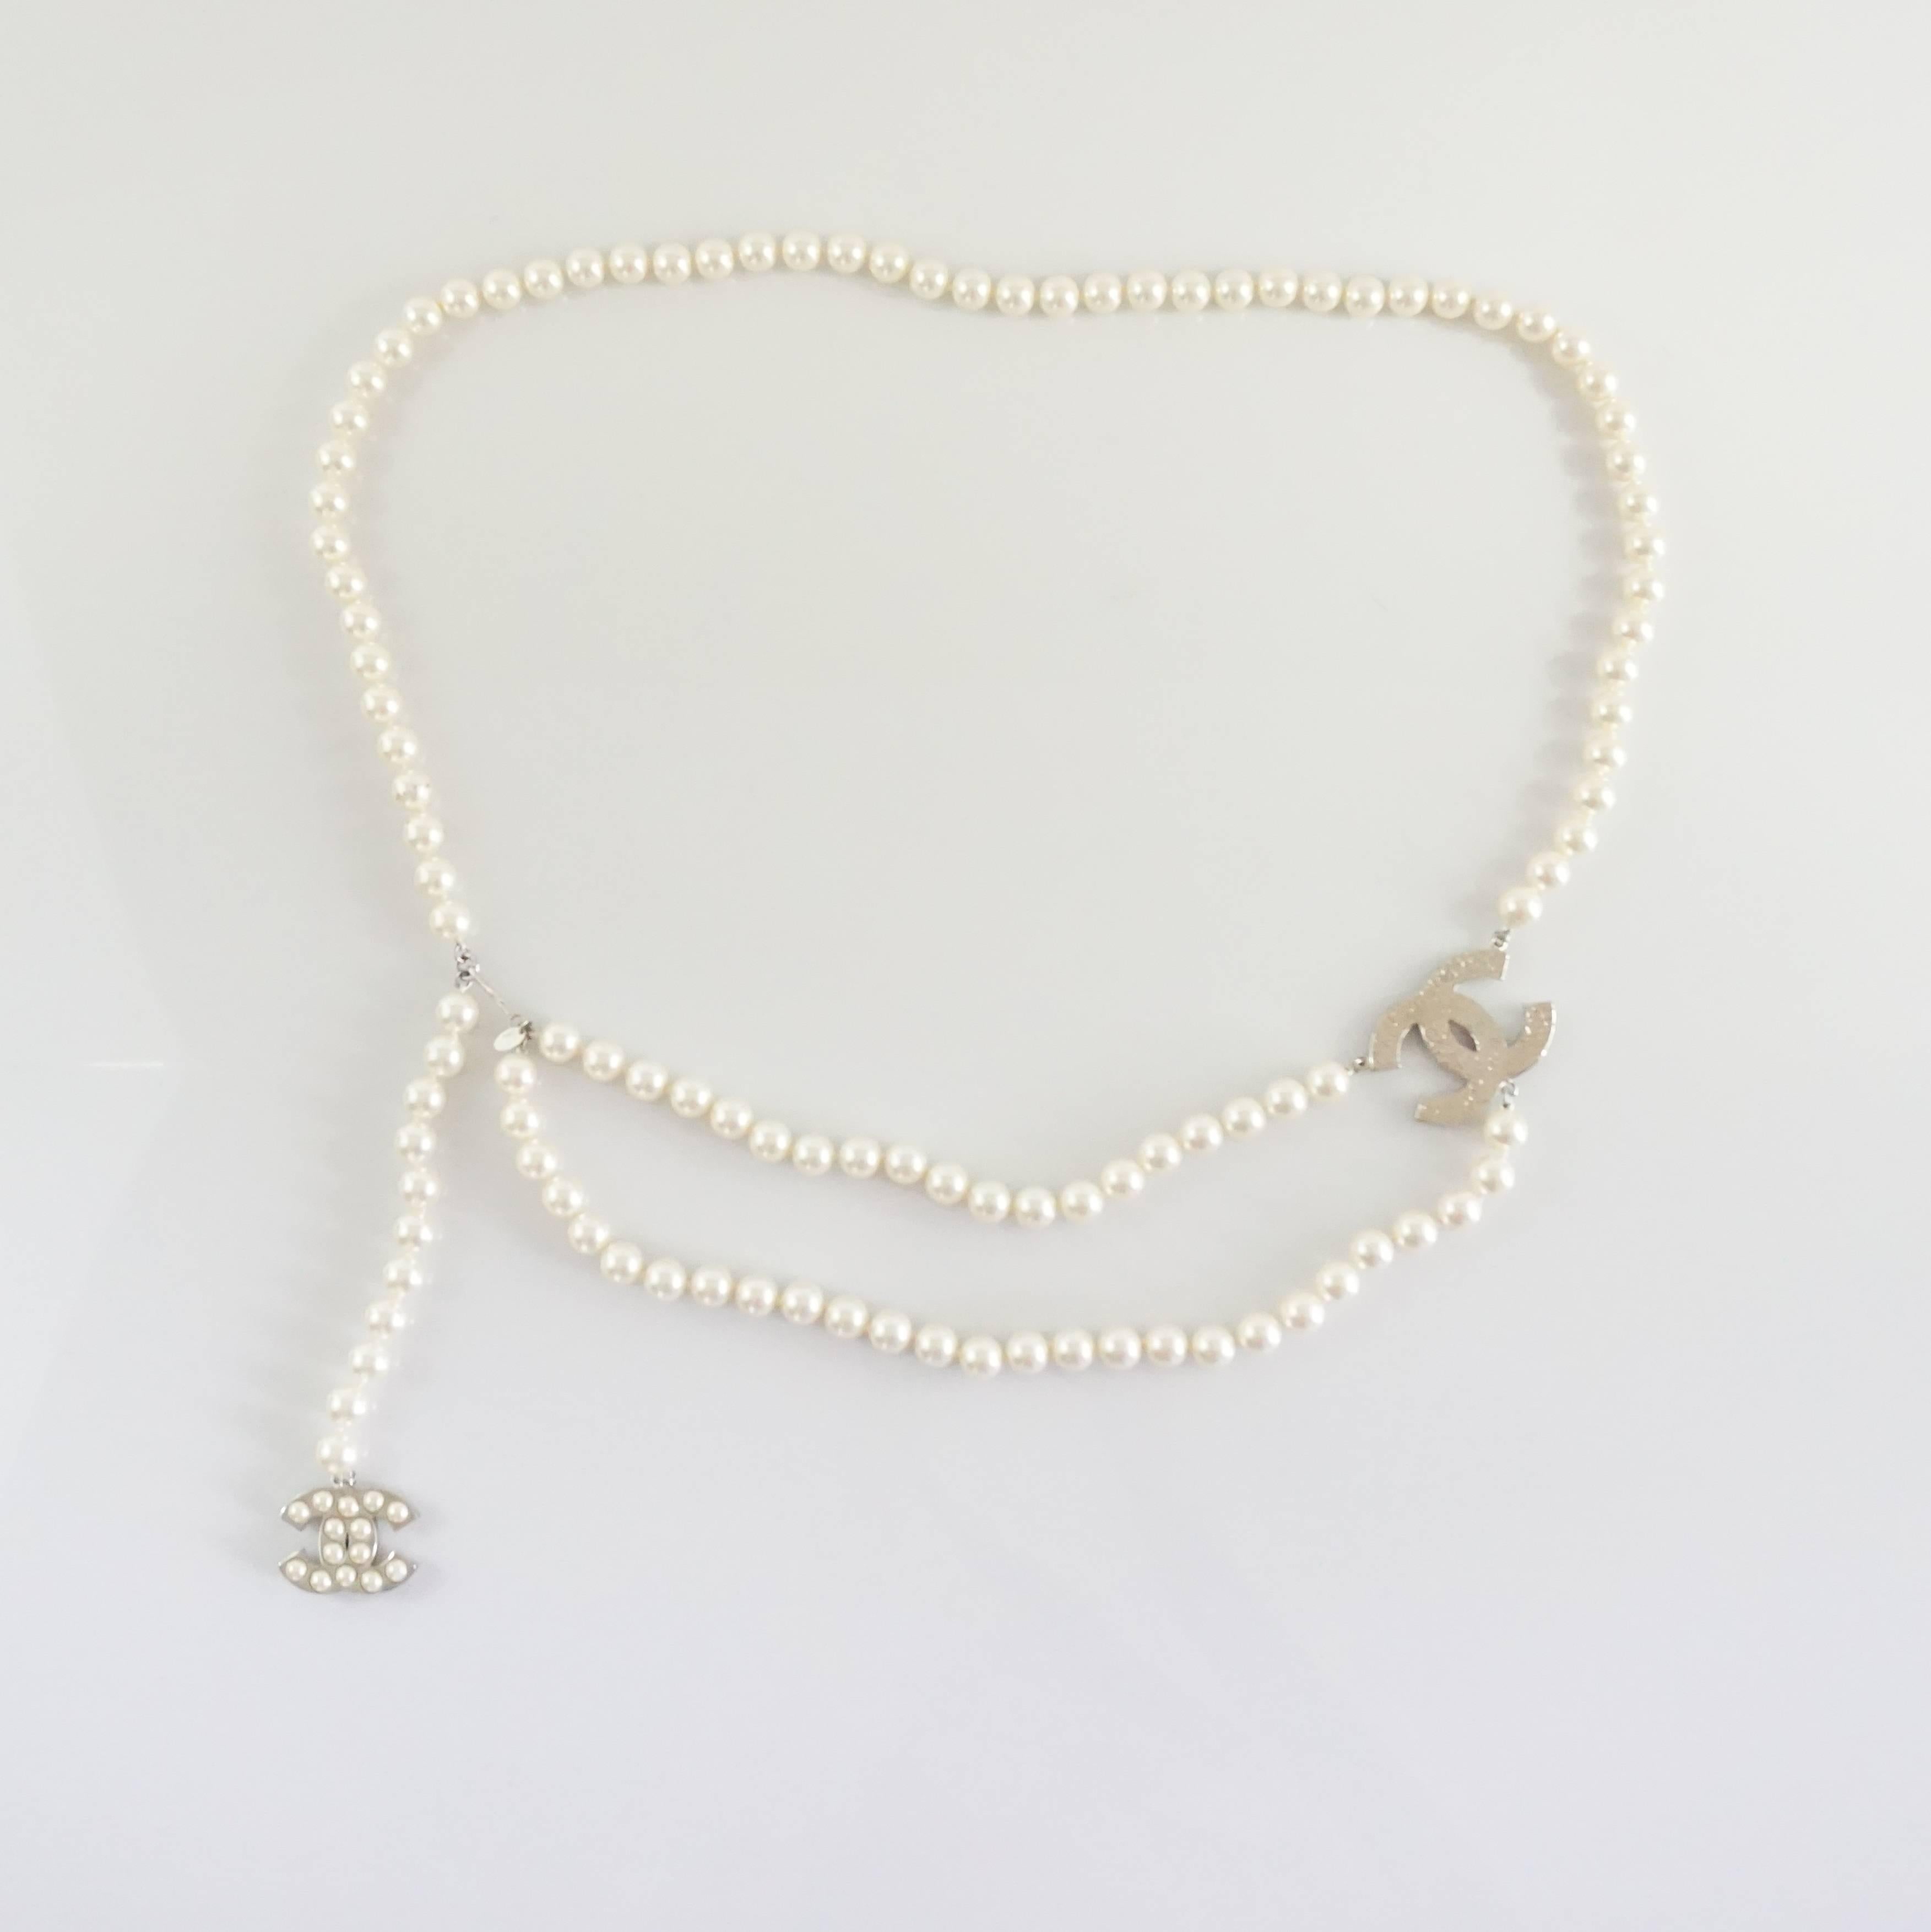 This Chanel pearl necklace also doubles as a belt. It is long with a big pearl encrusted CC in the middle and a hanging pearl CC charm on the end. The necklace is in impeccable condition and is brand new. 

Measurements
Length: 42